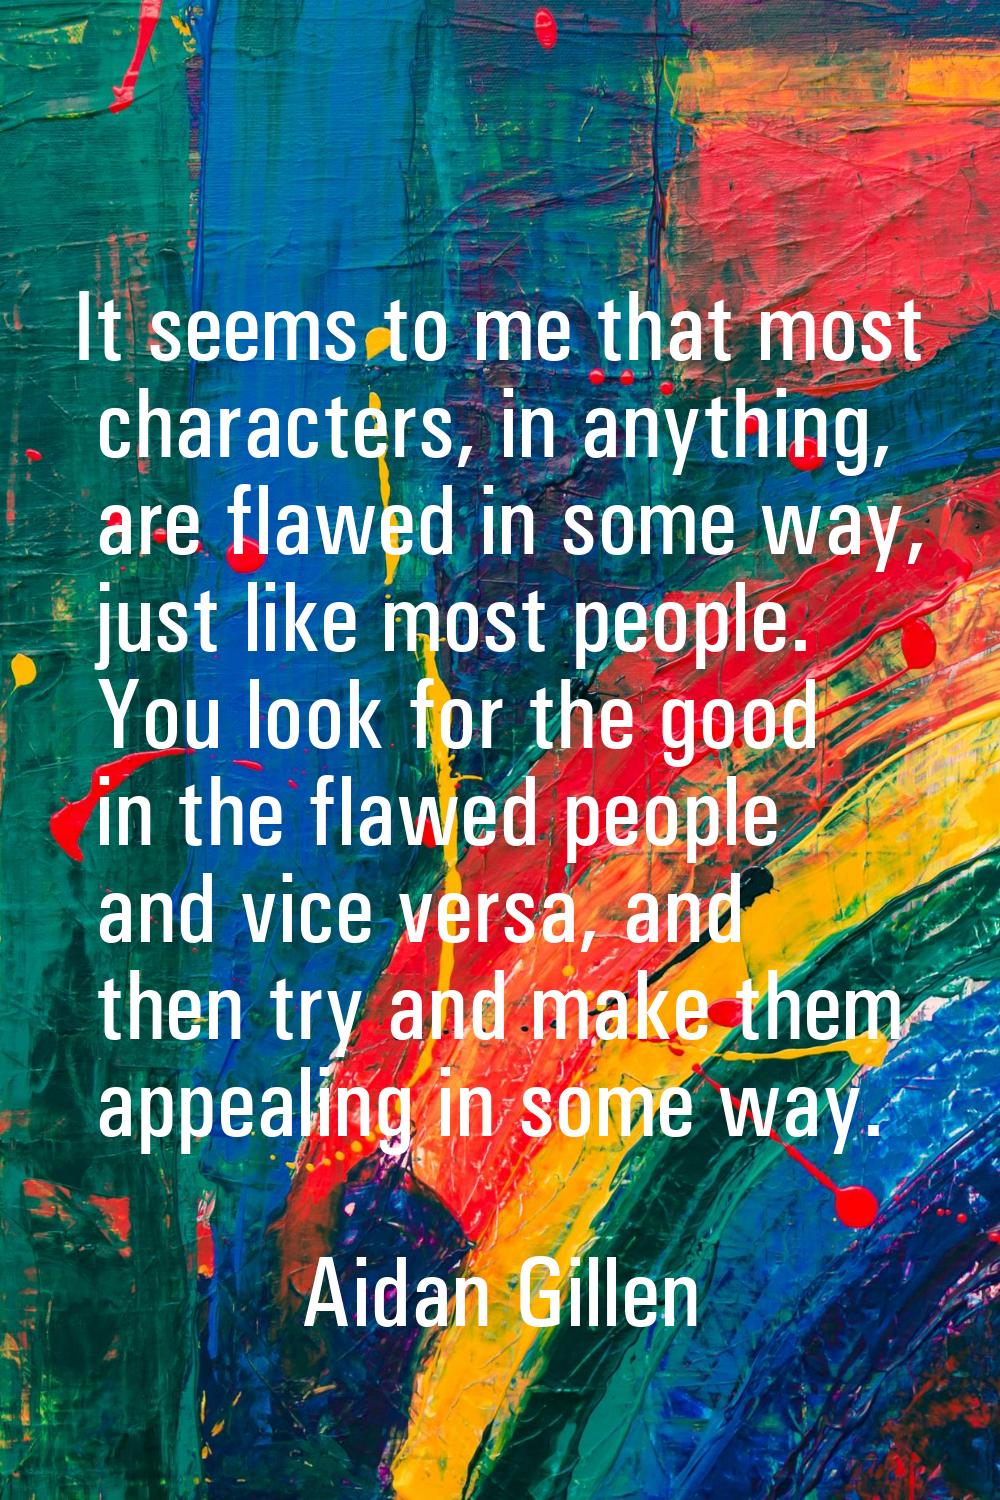 It seems to me that most characters, in anything, are flawed in some way, just like most people. Yo